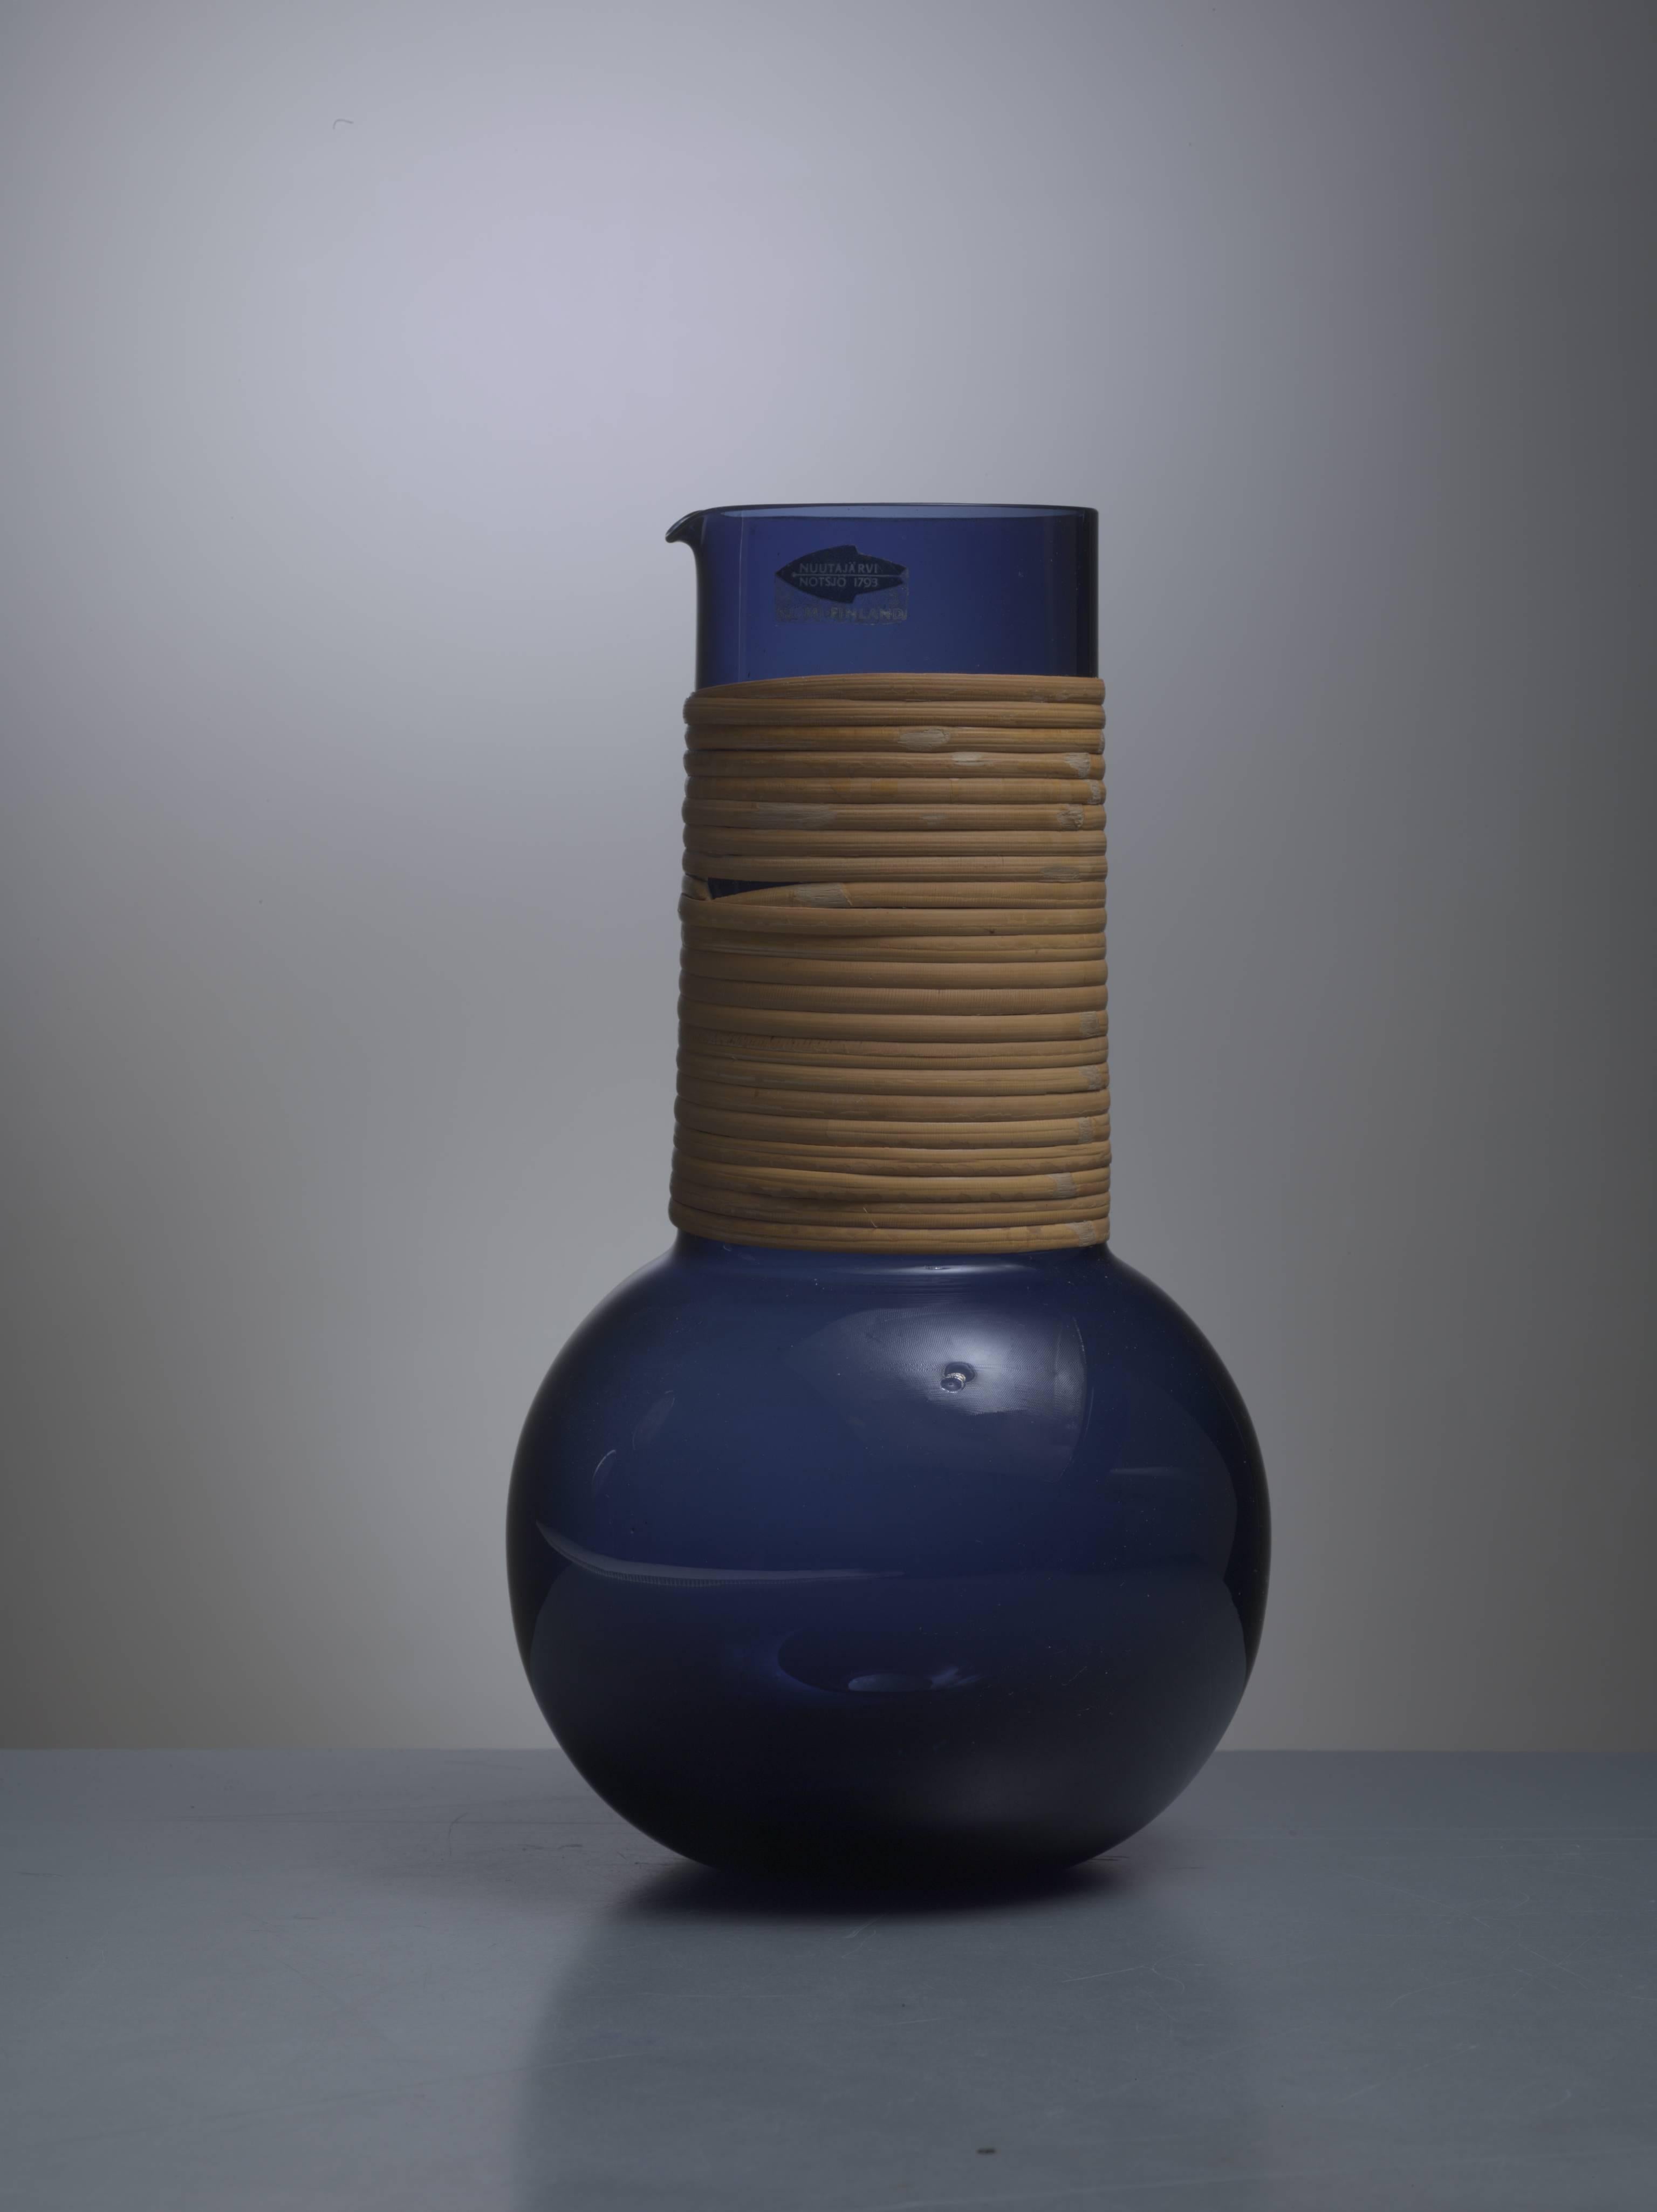 A blue glass pitcher with rattan wrapped around it. The pitcher was designed by Kaj Franck for Nuutajärvi, Finland, in 1955.
Labeled by Nuutajärvi and in a wonderful condition.